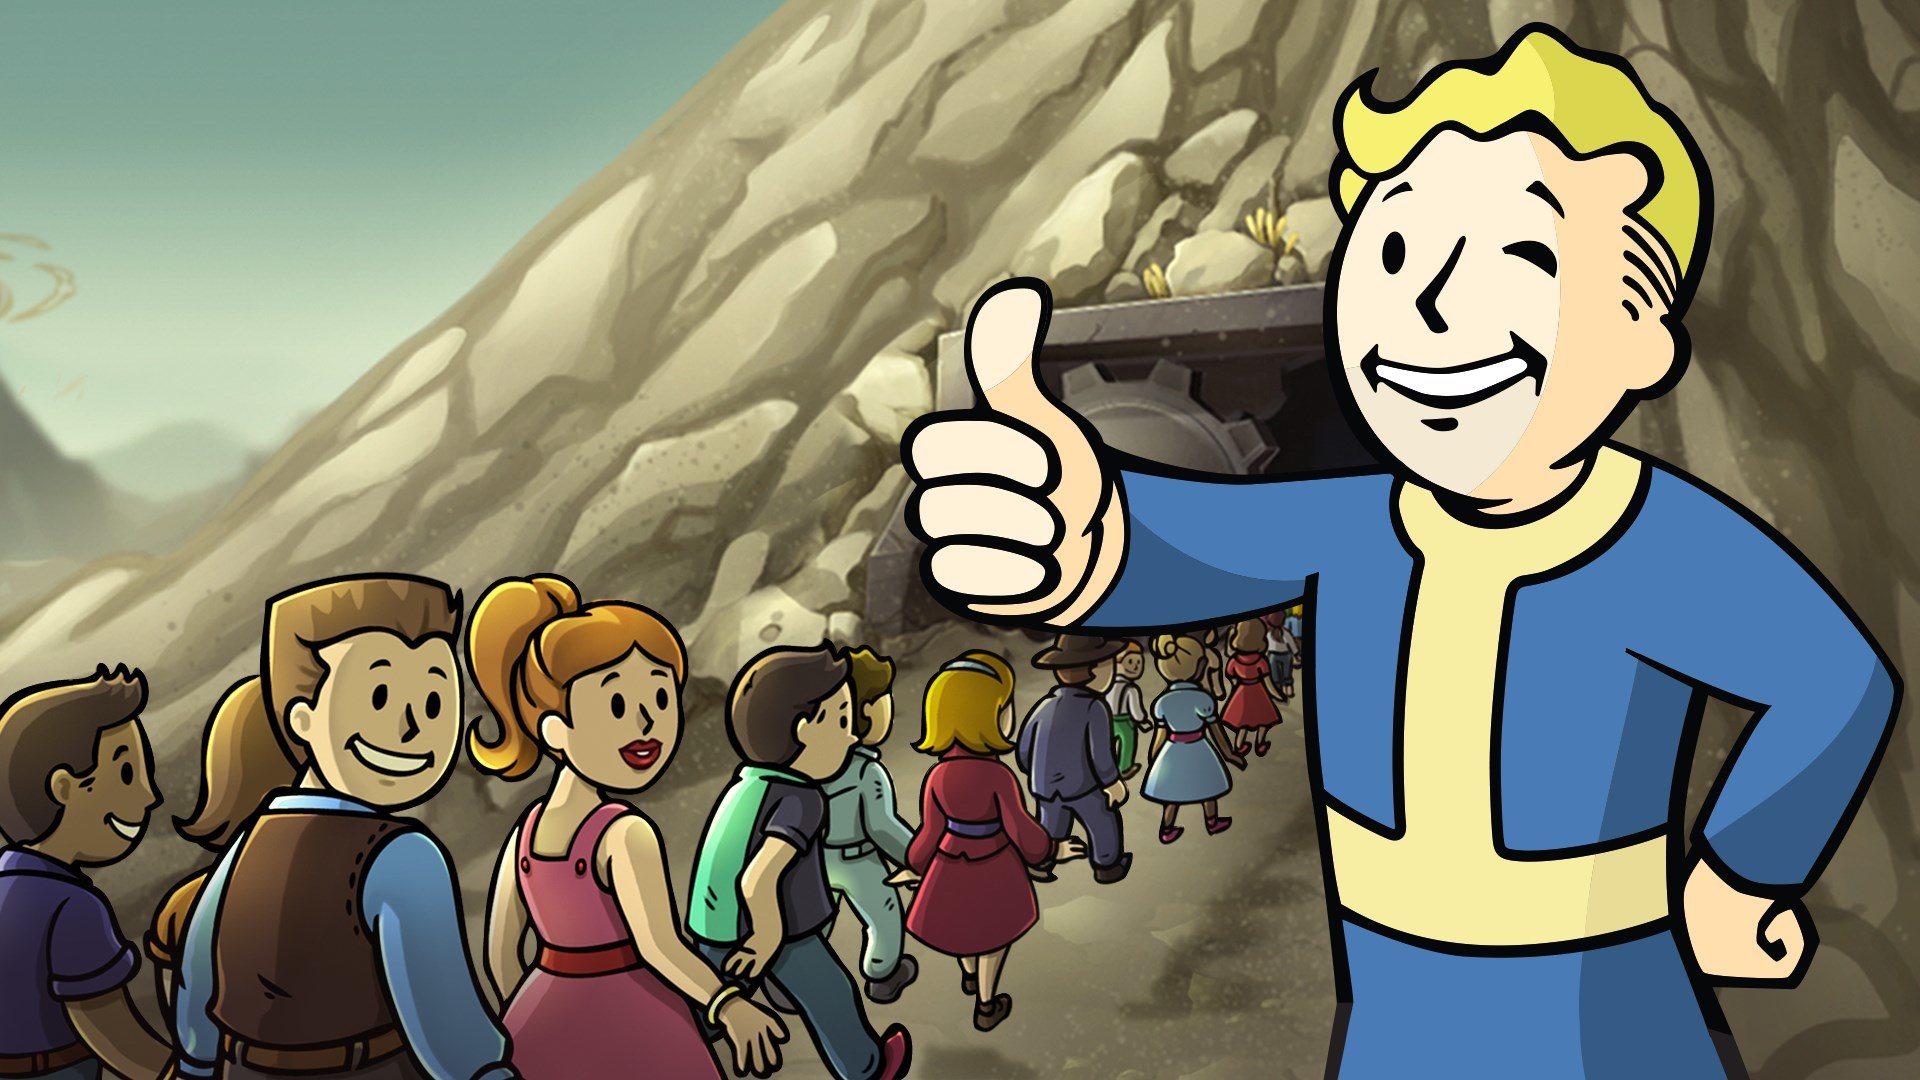 fallout shelter porn games